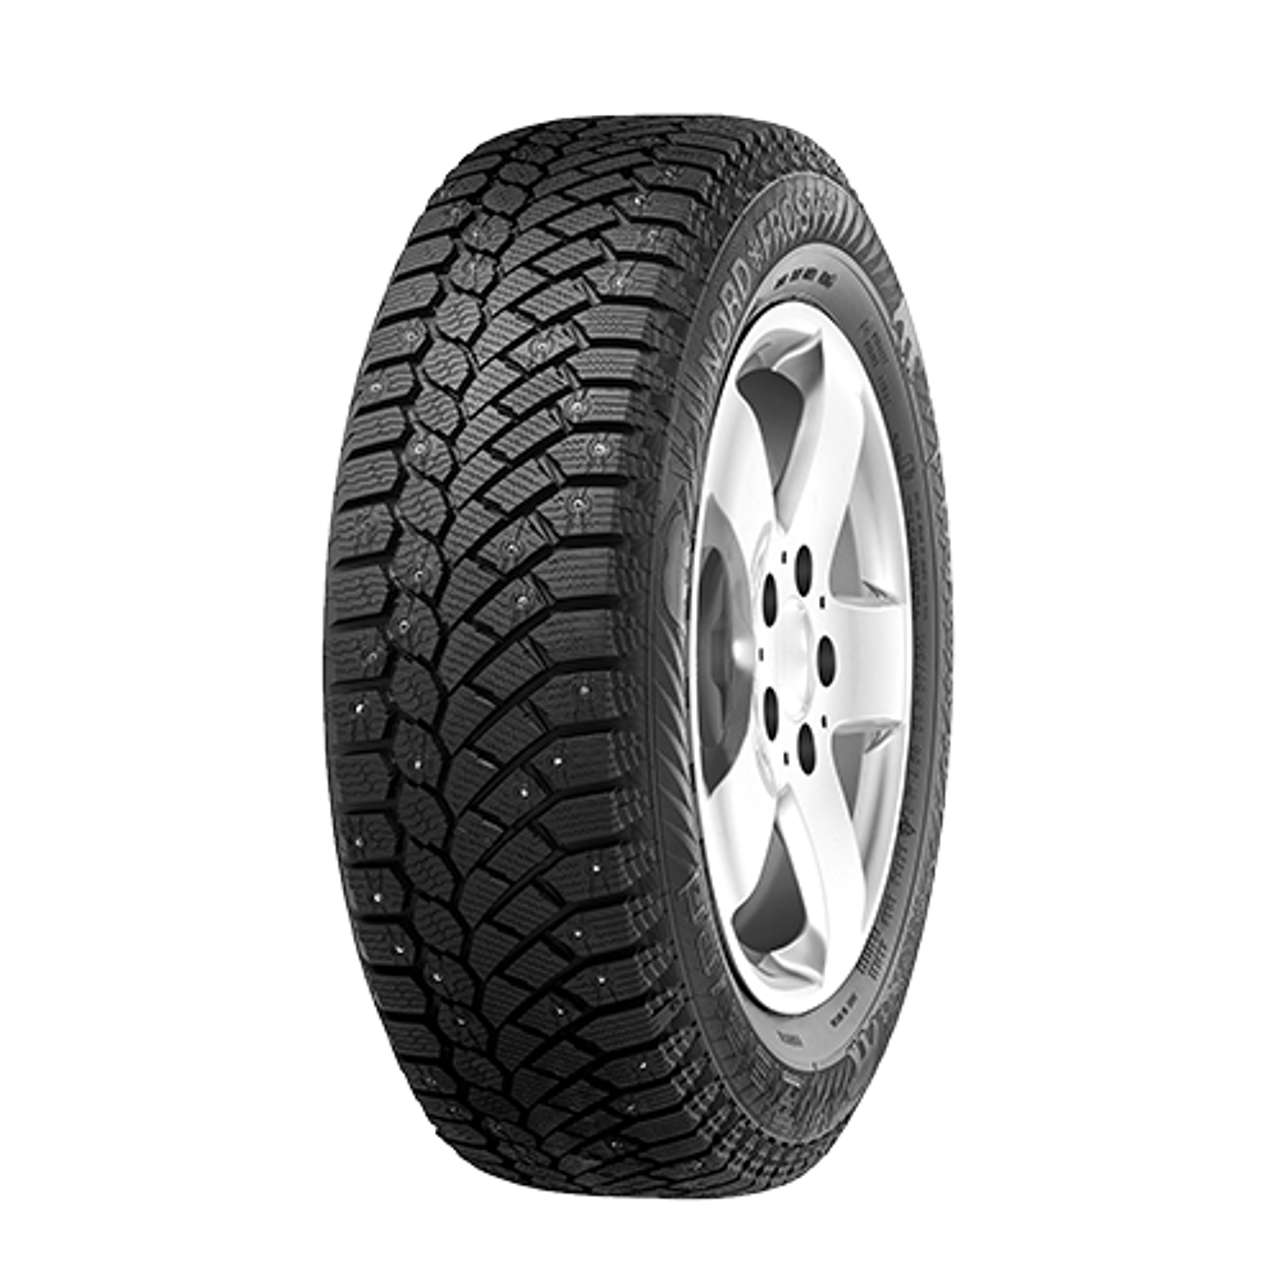 GISLAVED NORD*FROST 200 SUV 235/60R17 106T STUDDABLE FR XL